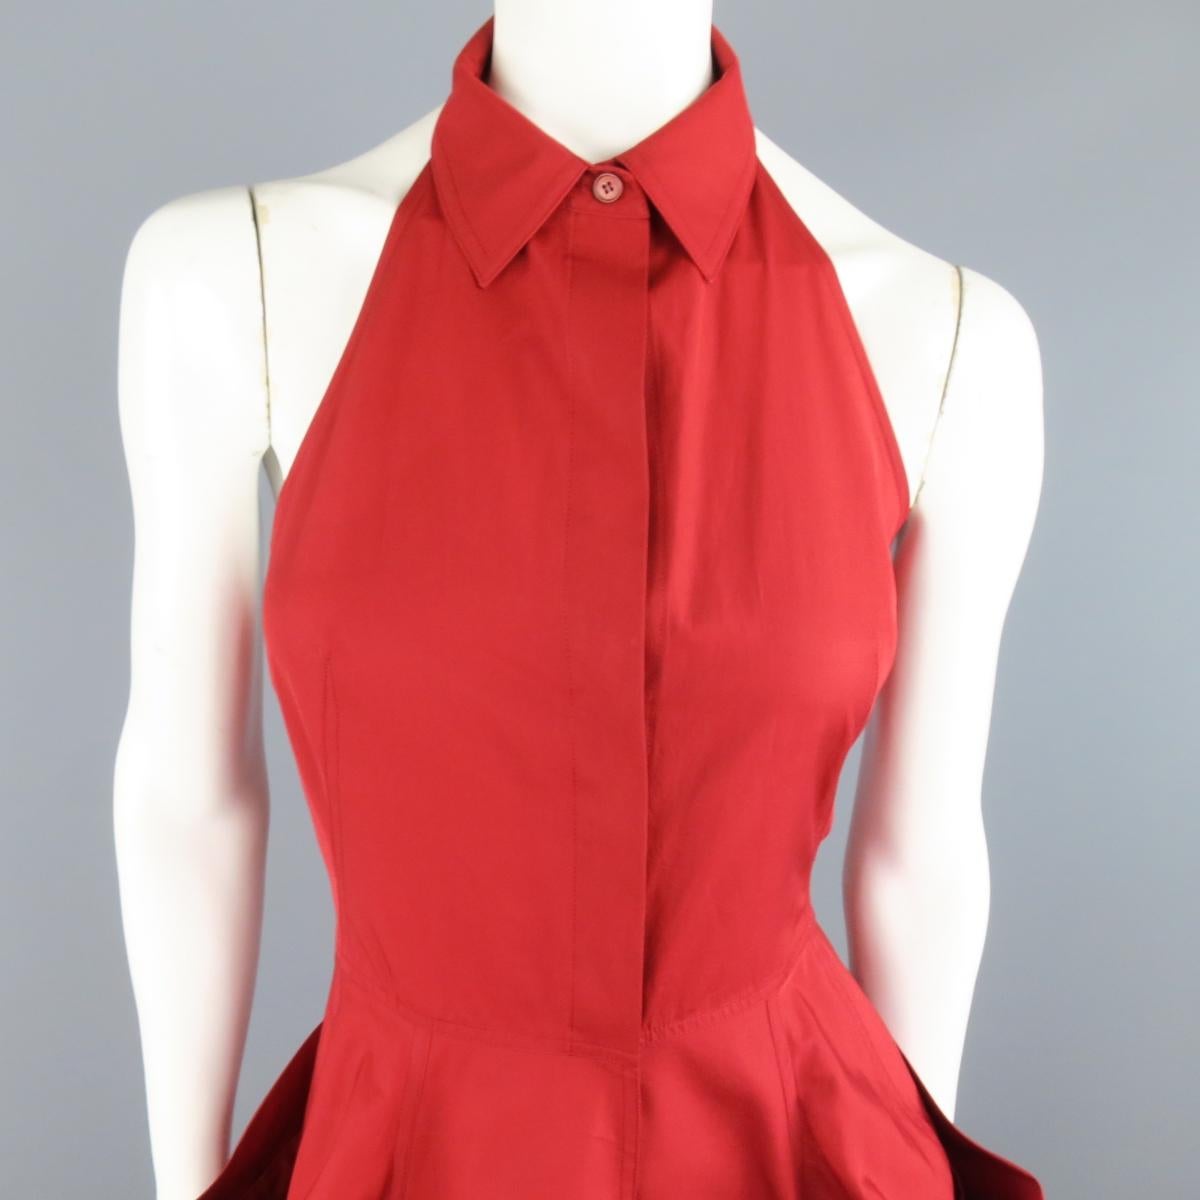 DONNA KARAN shirt dress in a red cotton featuring a hidden placket button and snap front, halter neckline with classic pointed collar, and full A-line skirt with draped panel pockets. Discolorations throughout. As-Is.

Good Pre-Owned